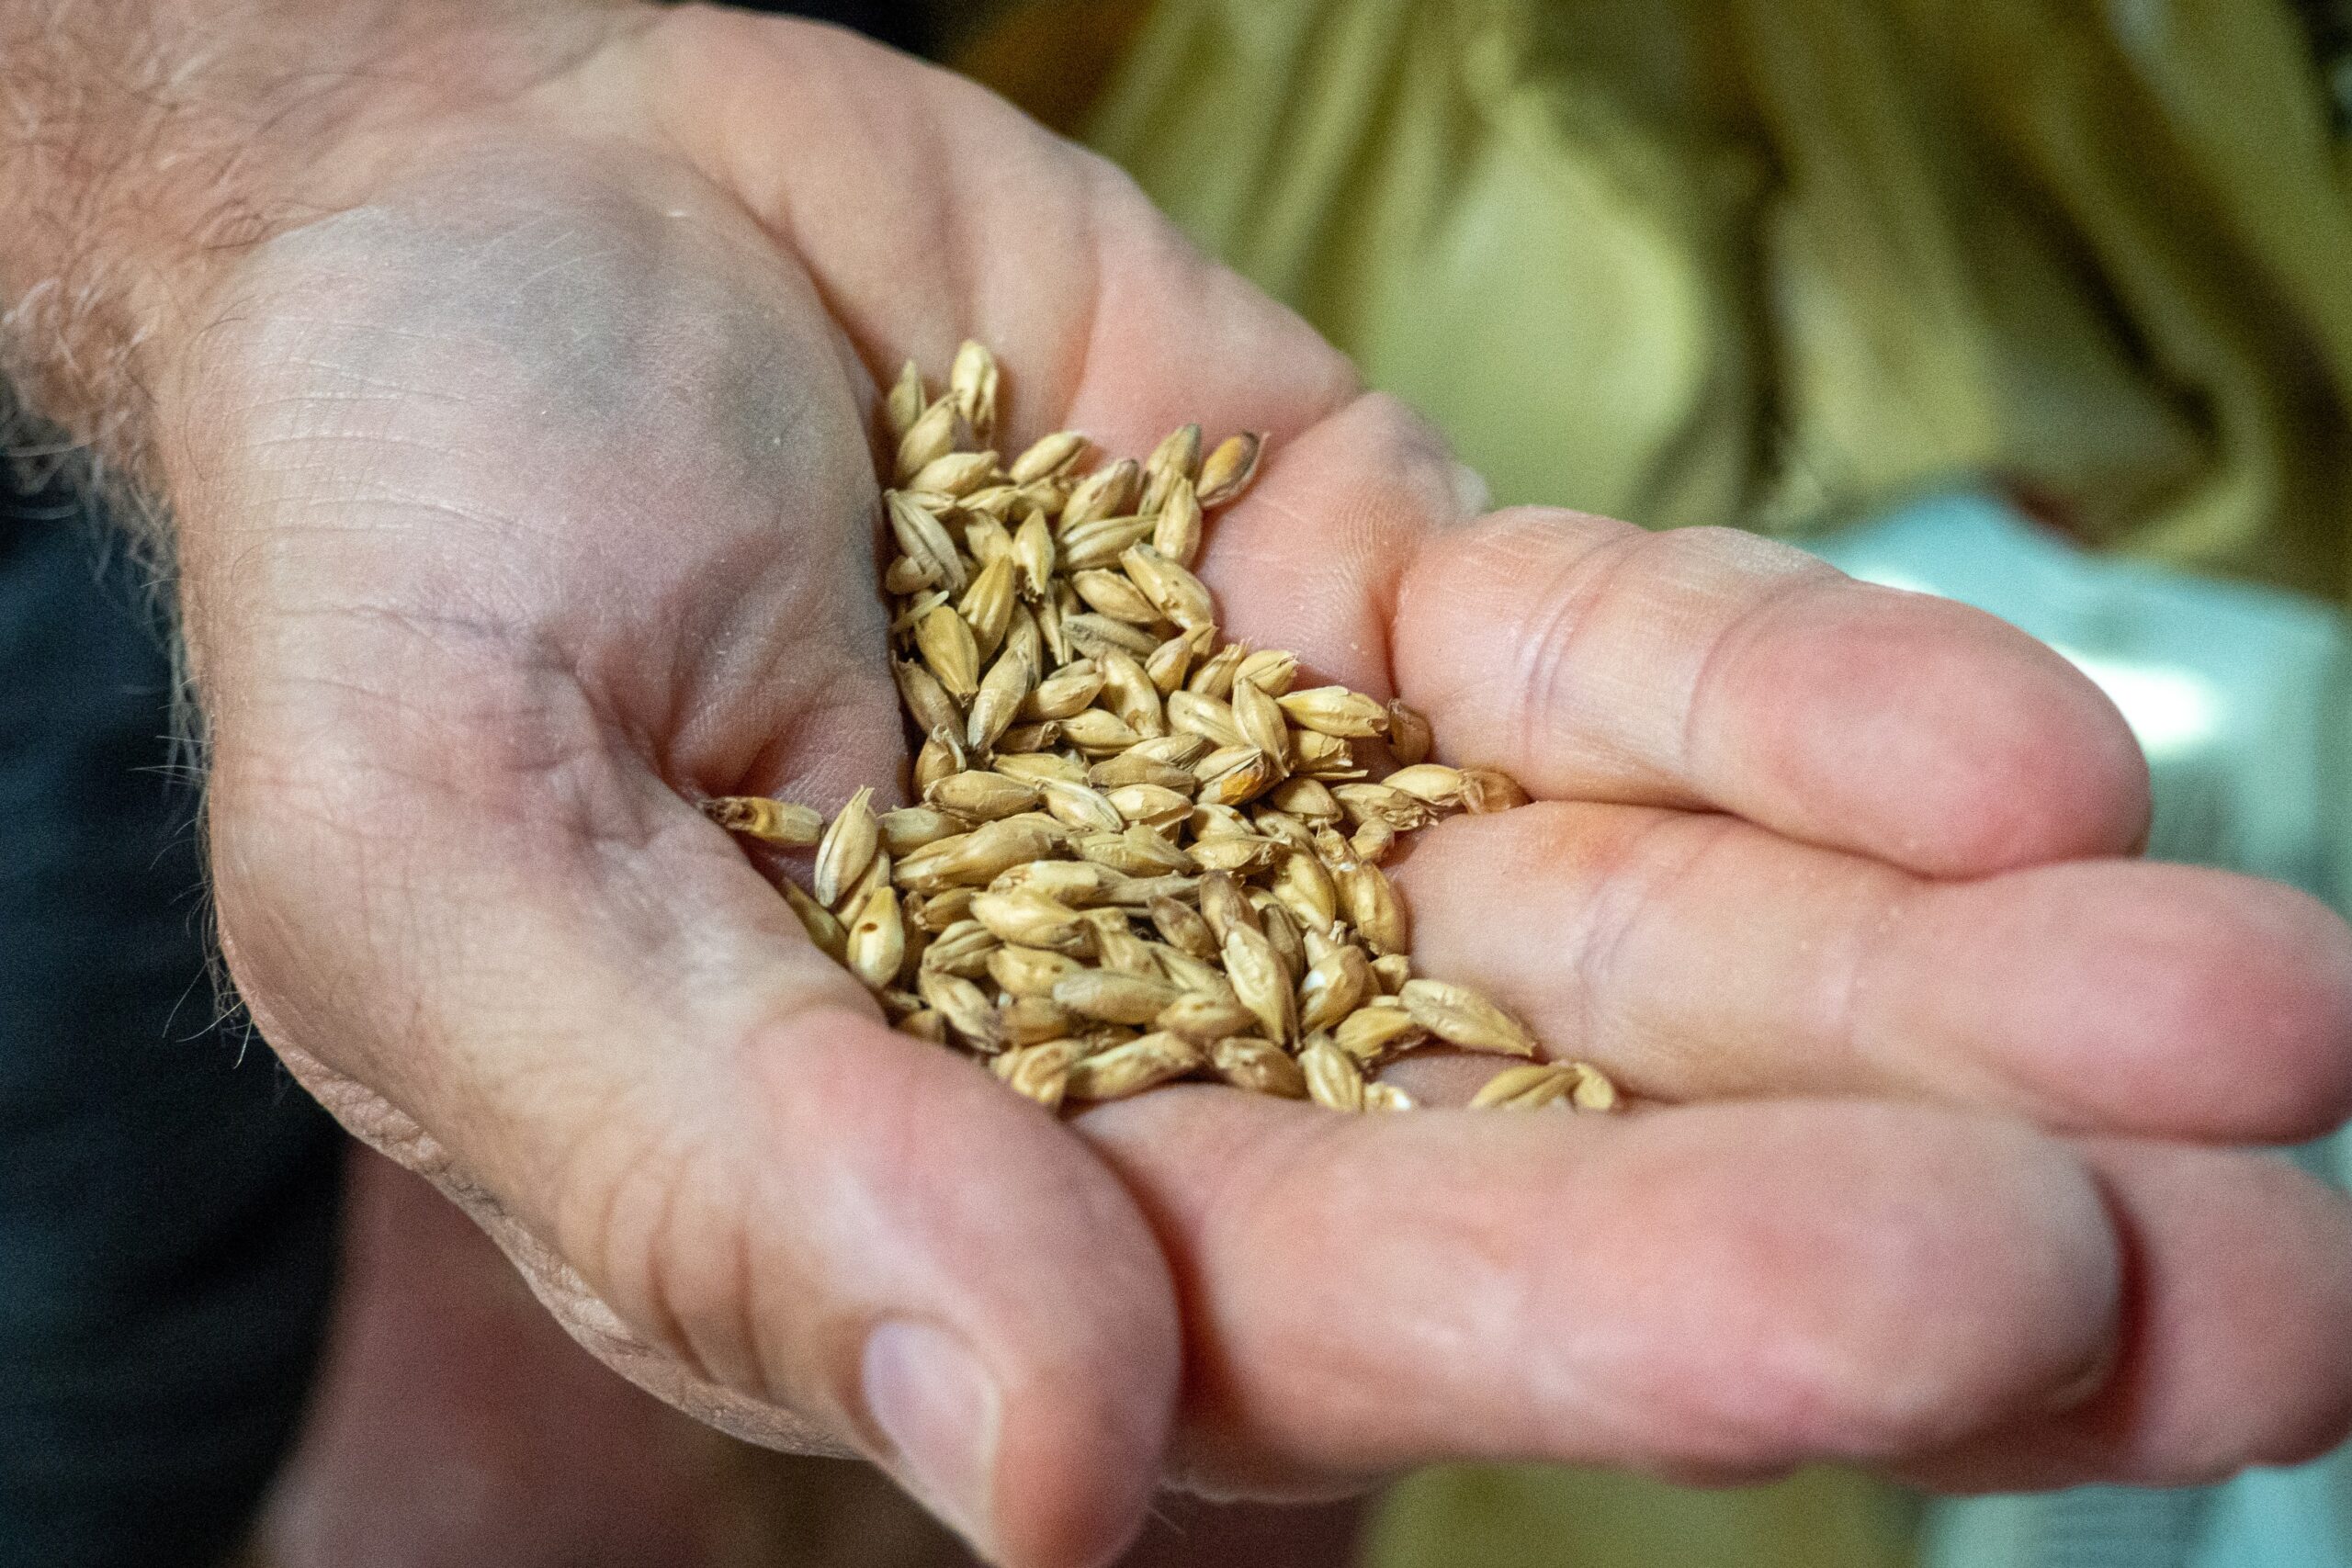 Photograph of a man's hand cupped and holding malted barley grains.